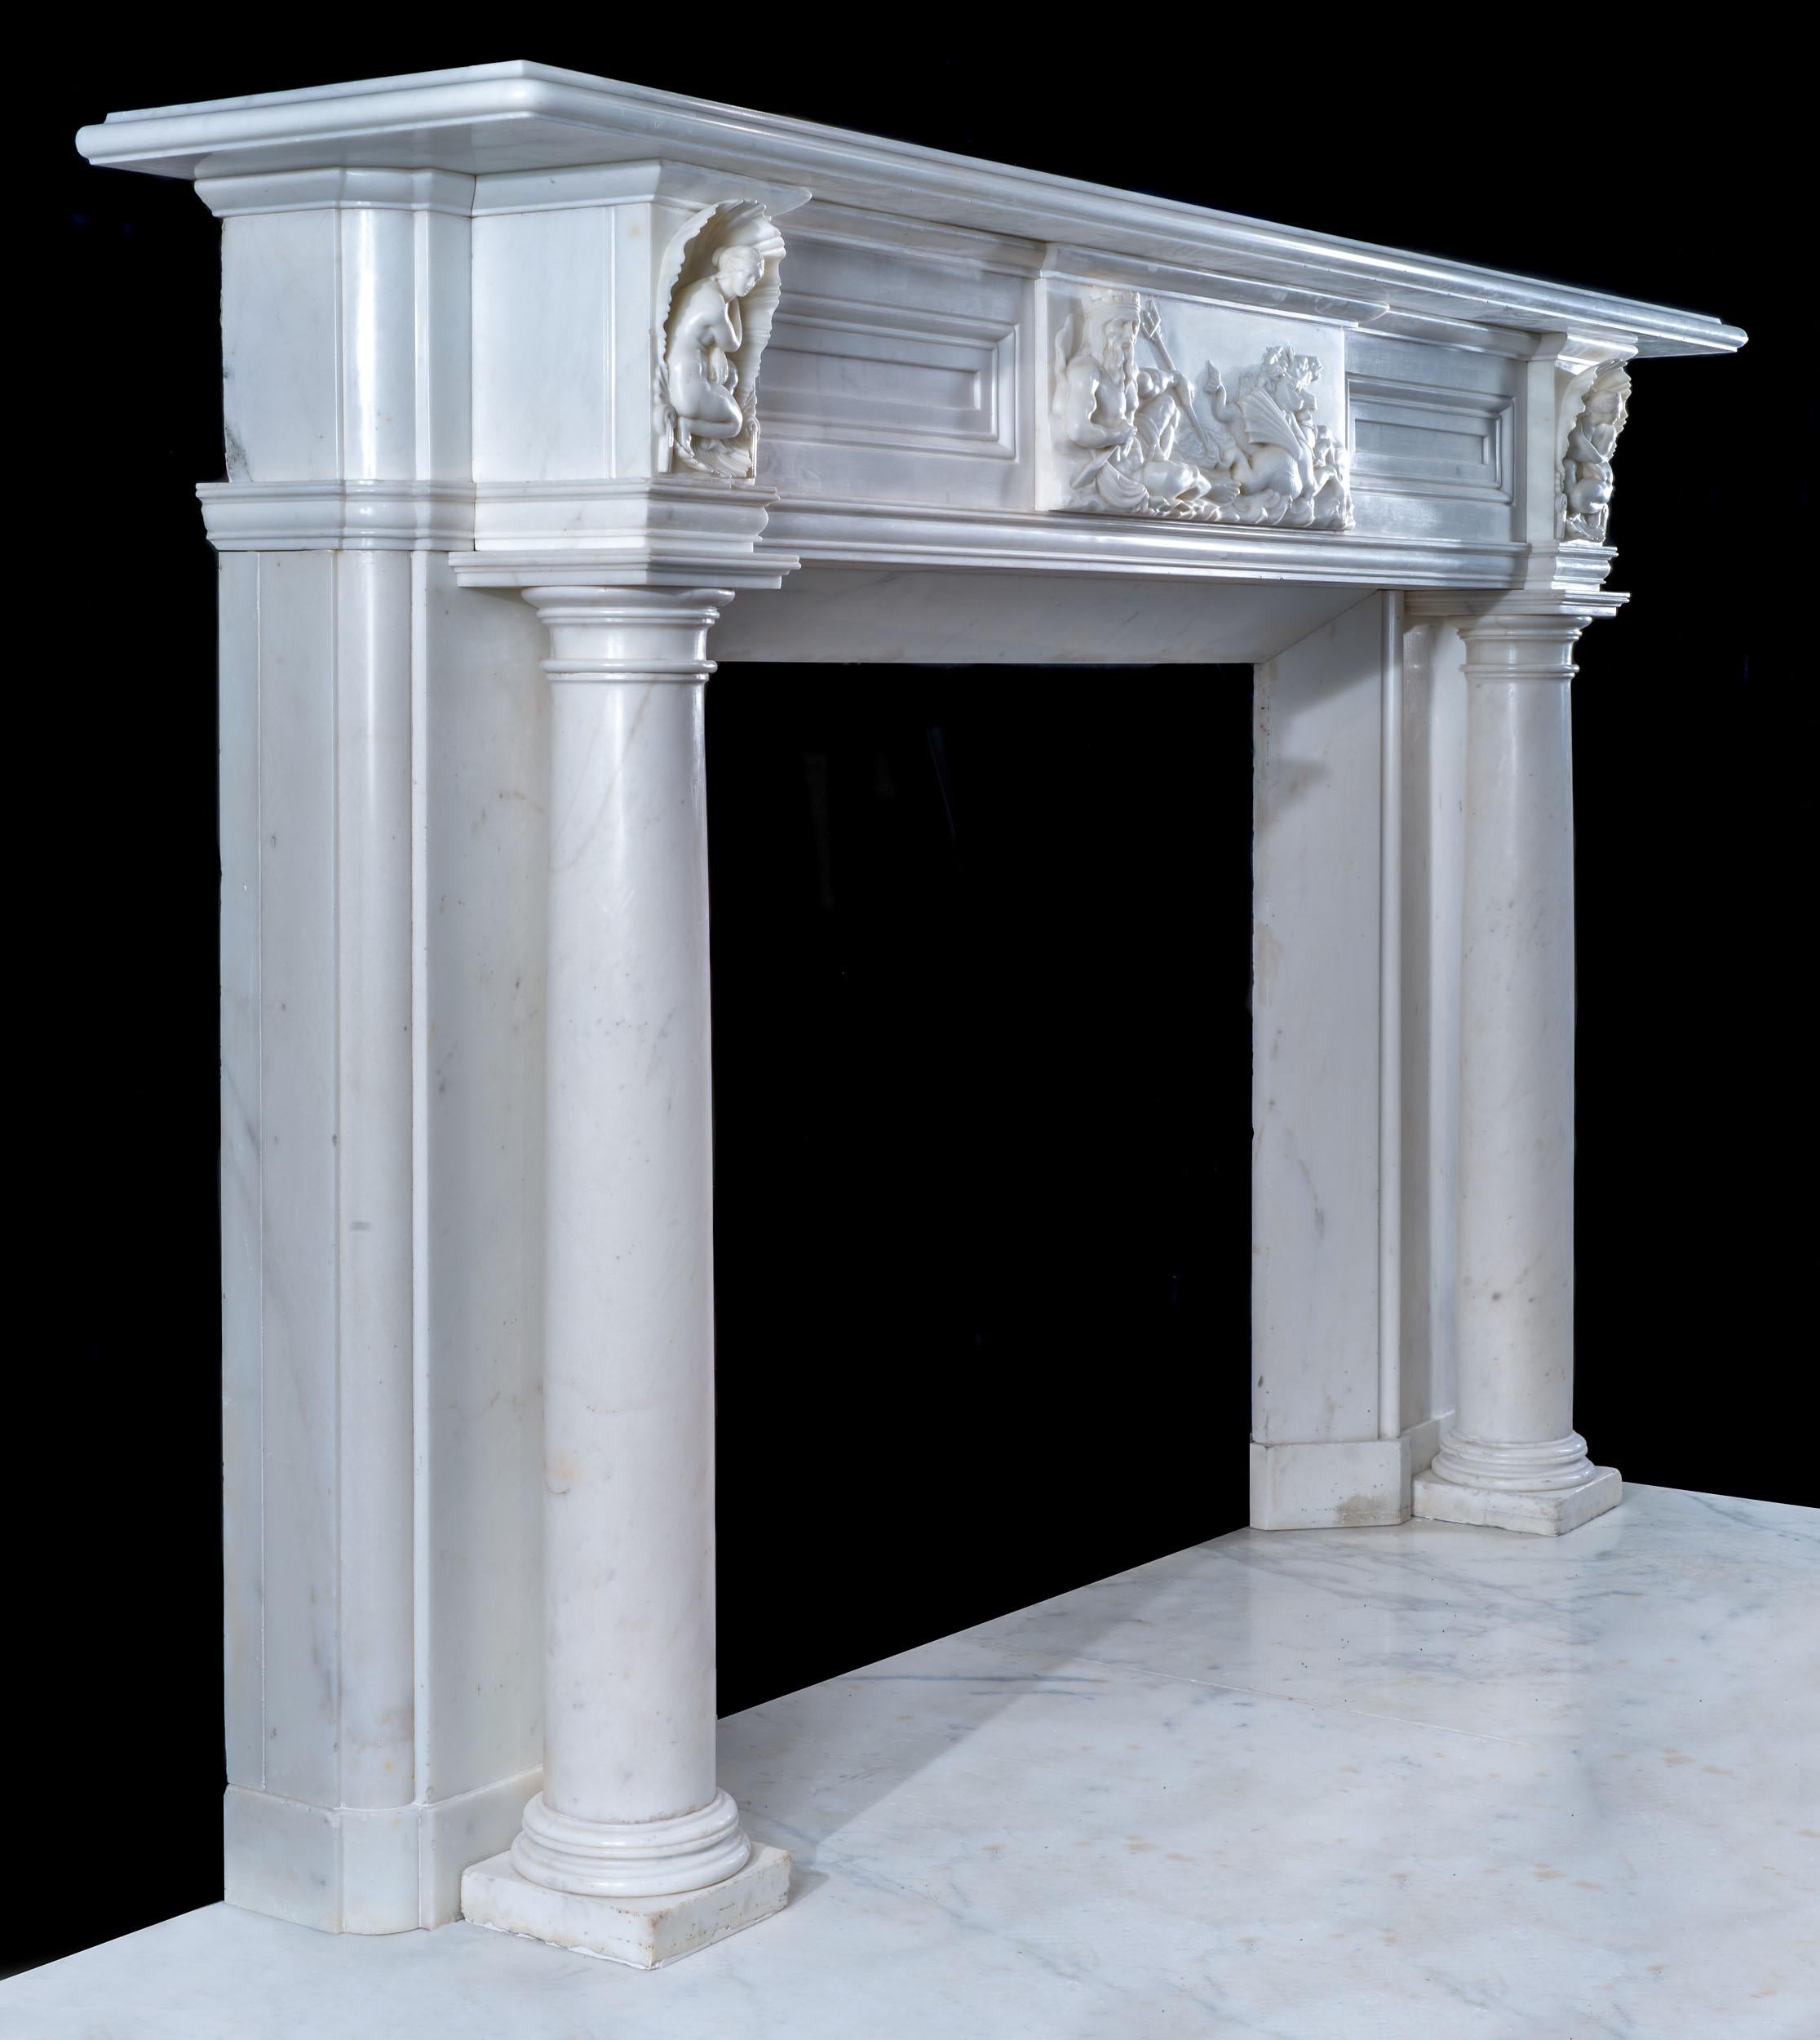 A rare Irish chimneypiece of grand proportions in statuary marble. The generous moulded shelf rests over a wide panelled frieze which is mounted with a tablet of exceptional quality. It depicts a recumbent Poseidon, god of the sea, being drawn on a